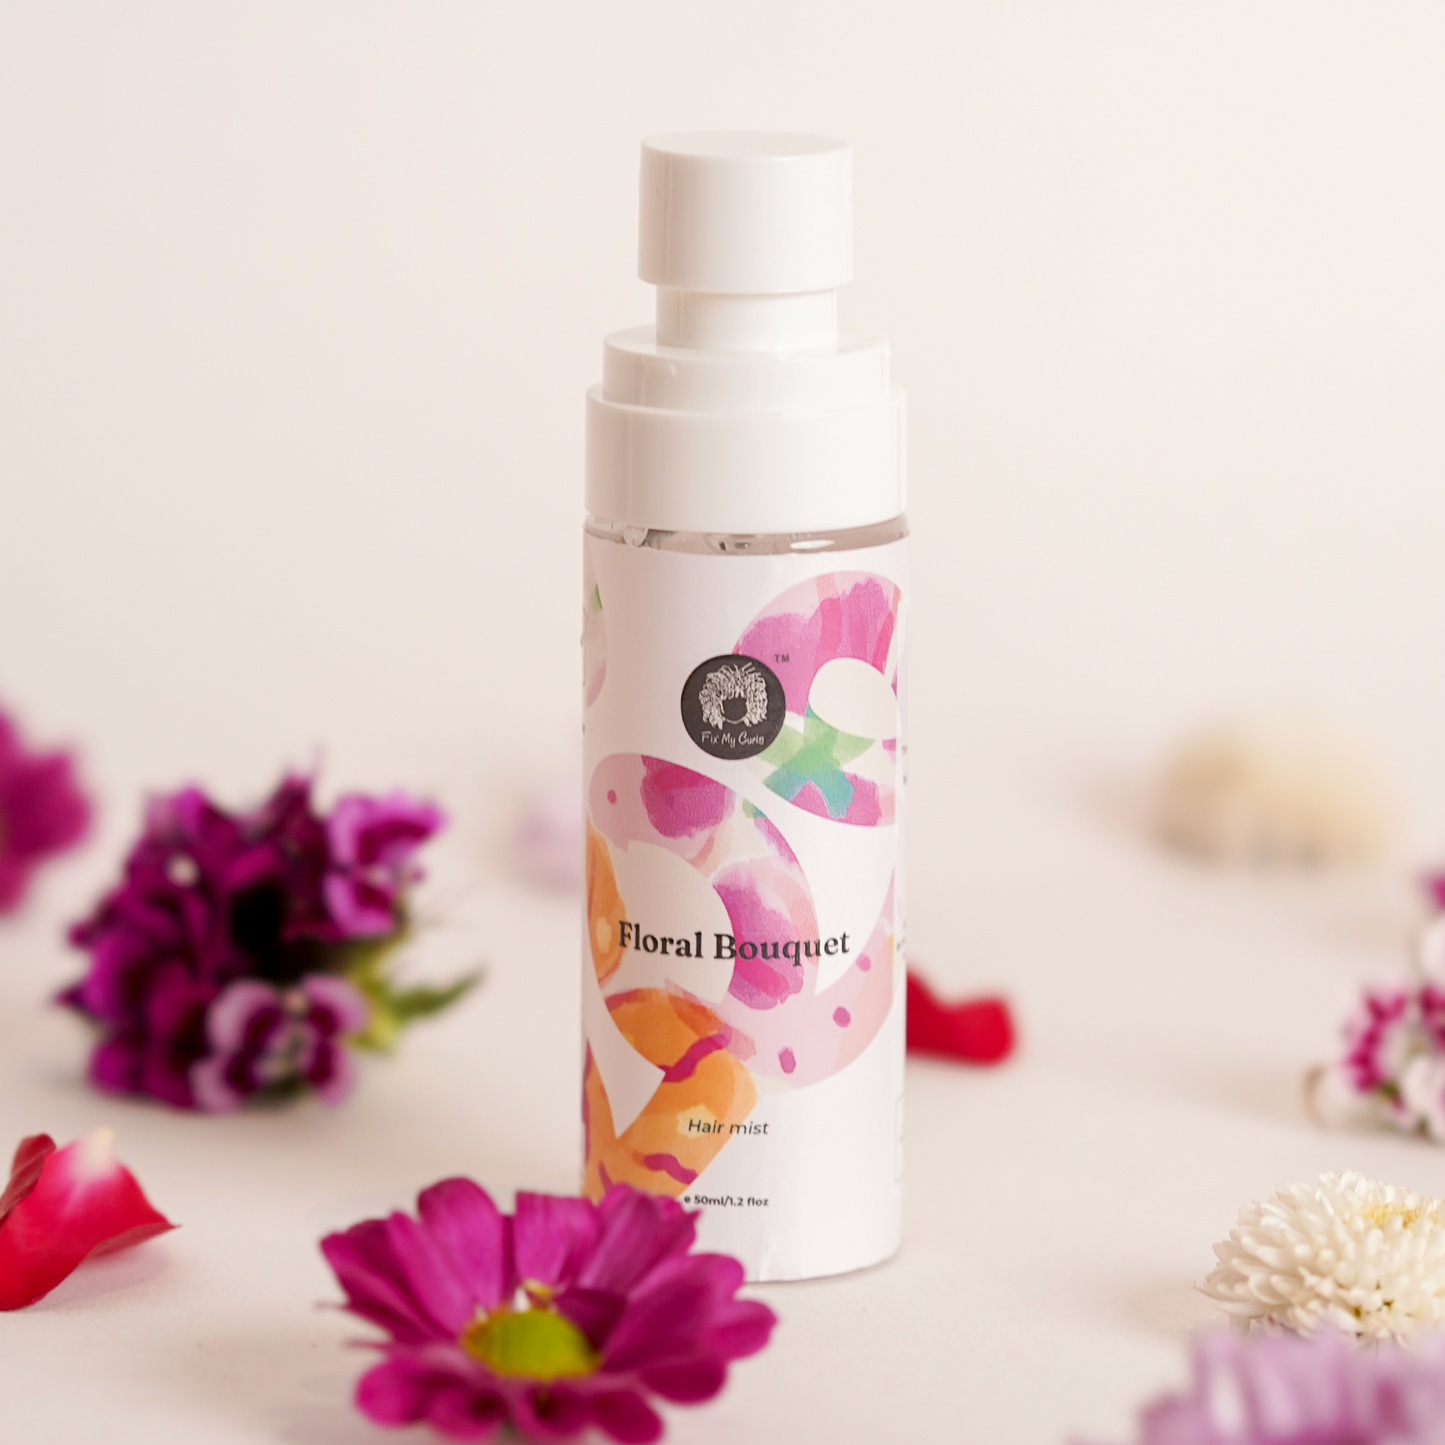 Hair Mist Fragrance | Floral Bouquet Scent | Notes of Floral, Sweet, Rose, Vanilla |Alcohol Free & Unisex | 50ml